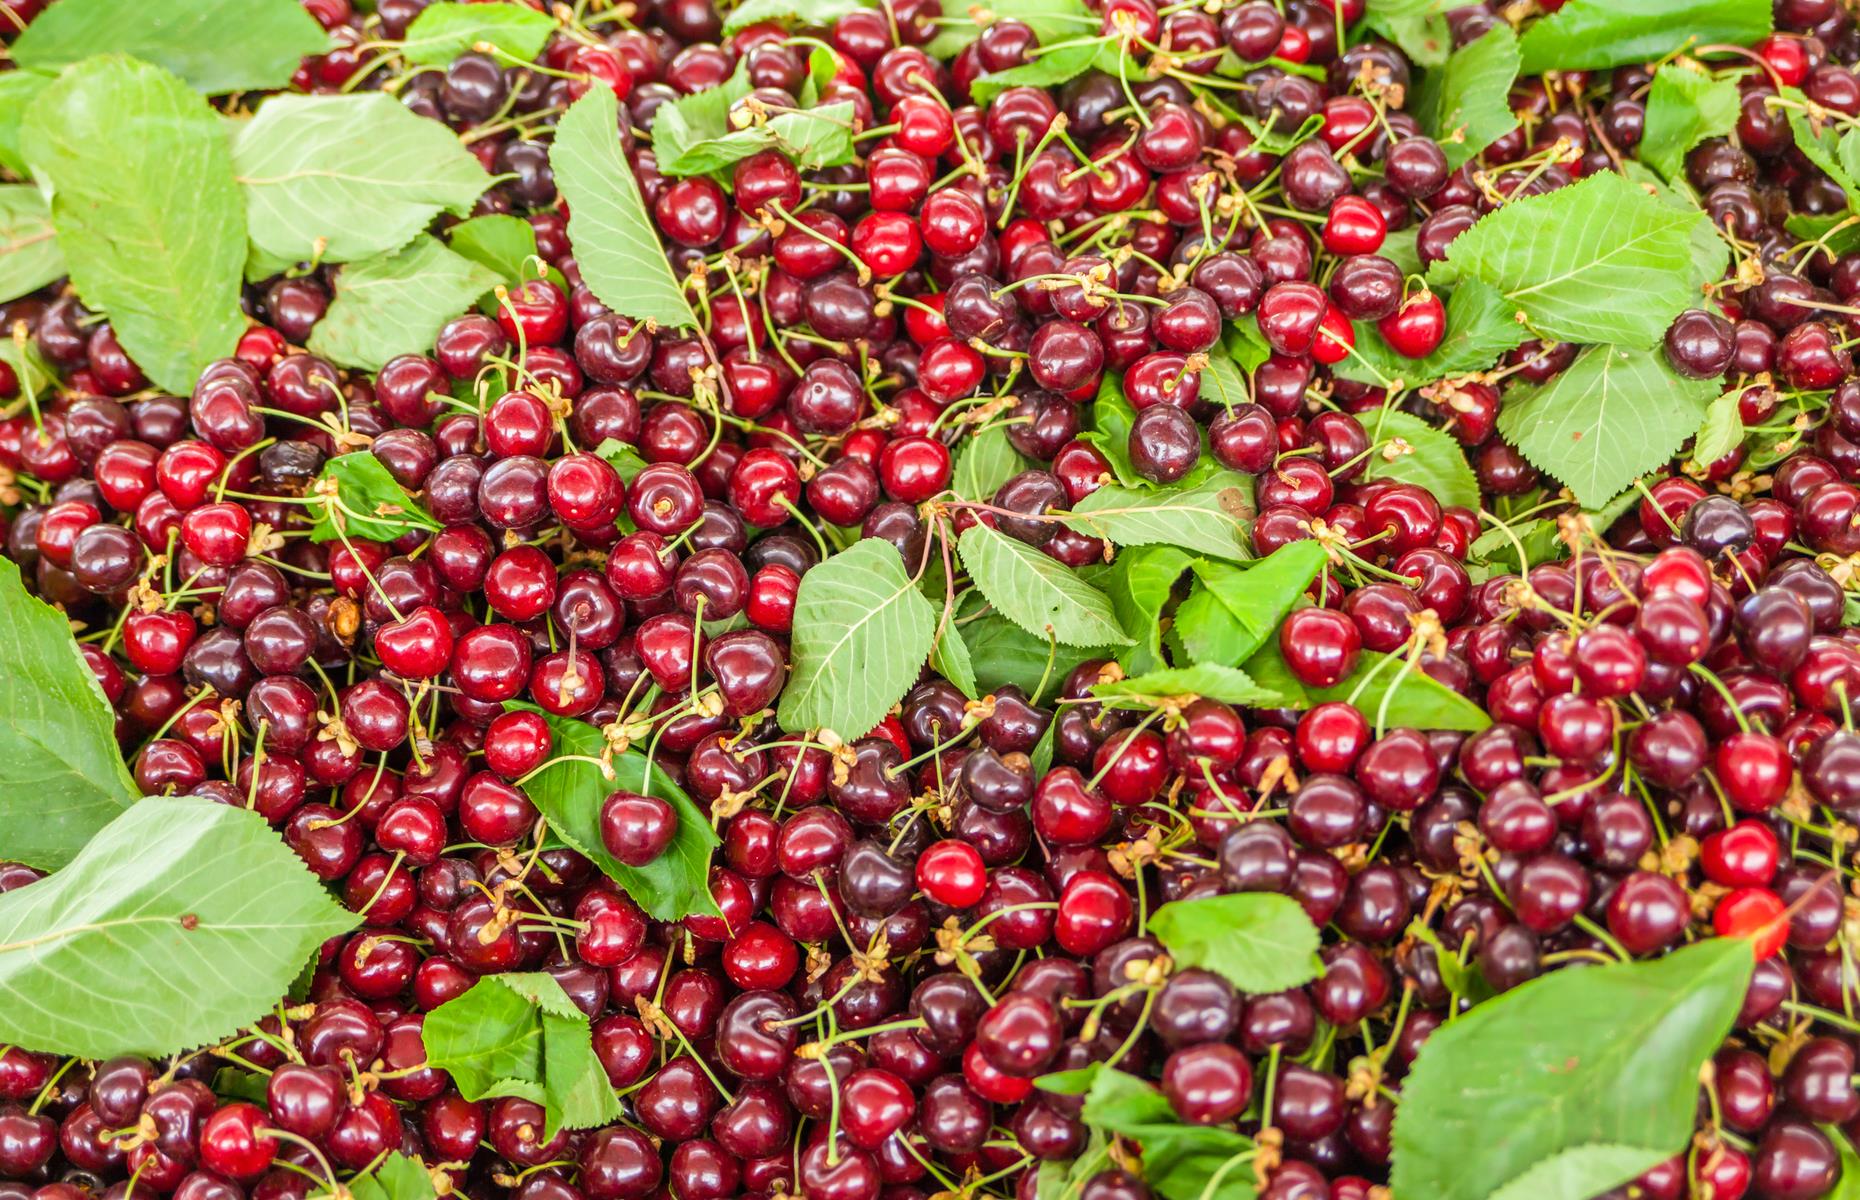 Chile is the chief cherry exporter